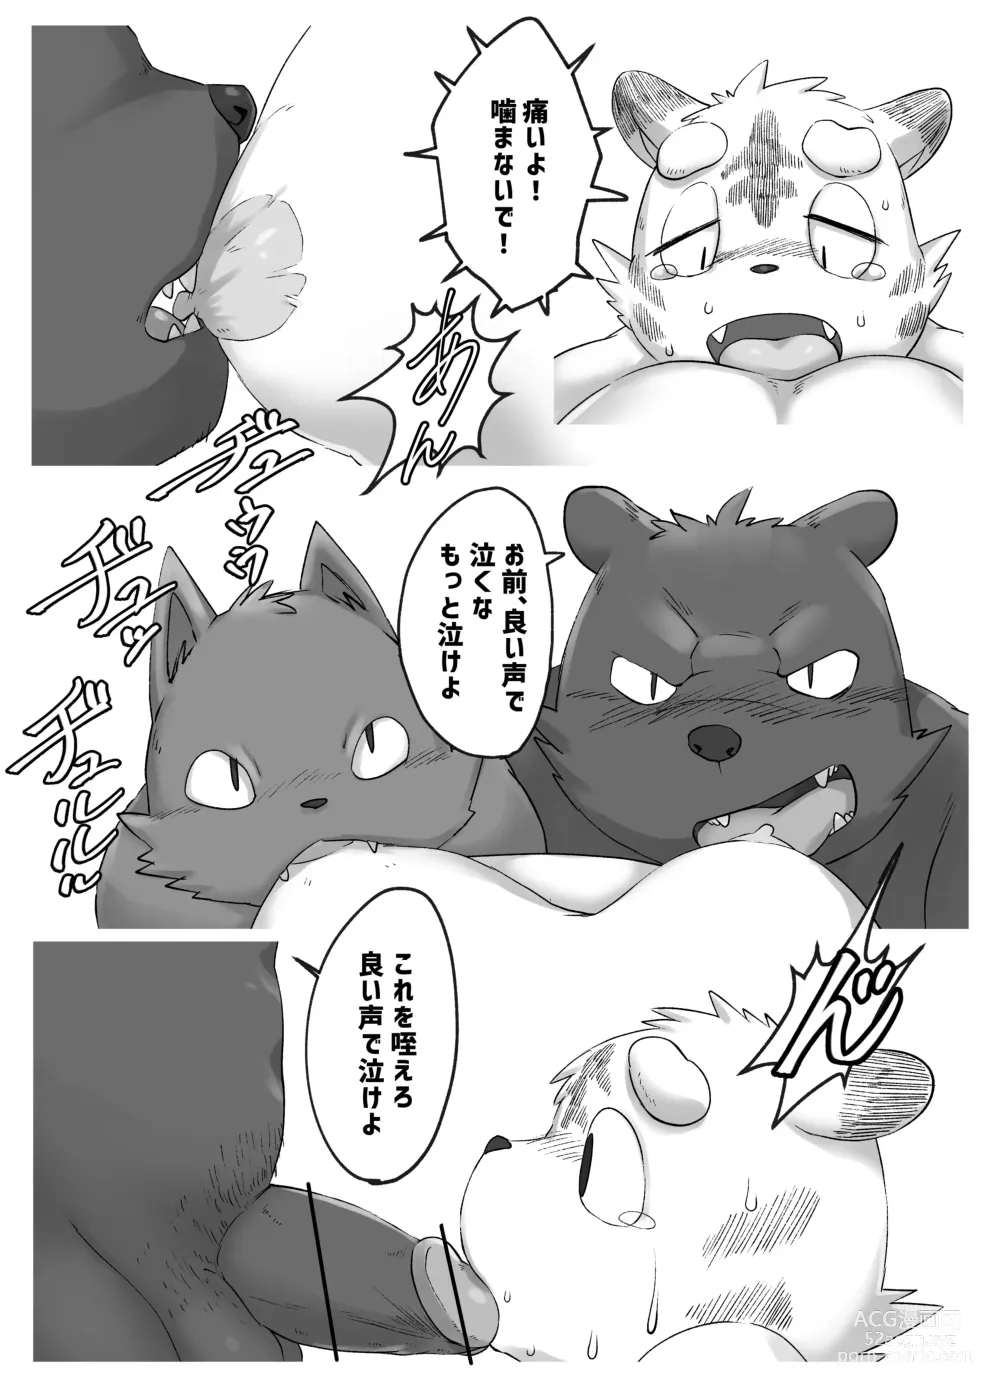 Page 11 of doujinshi Muscular Bull Teacher & Chubby Tiger Student 3